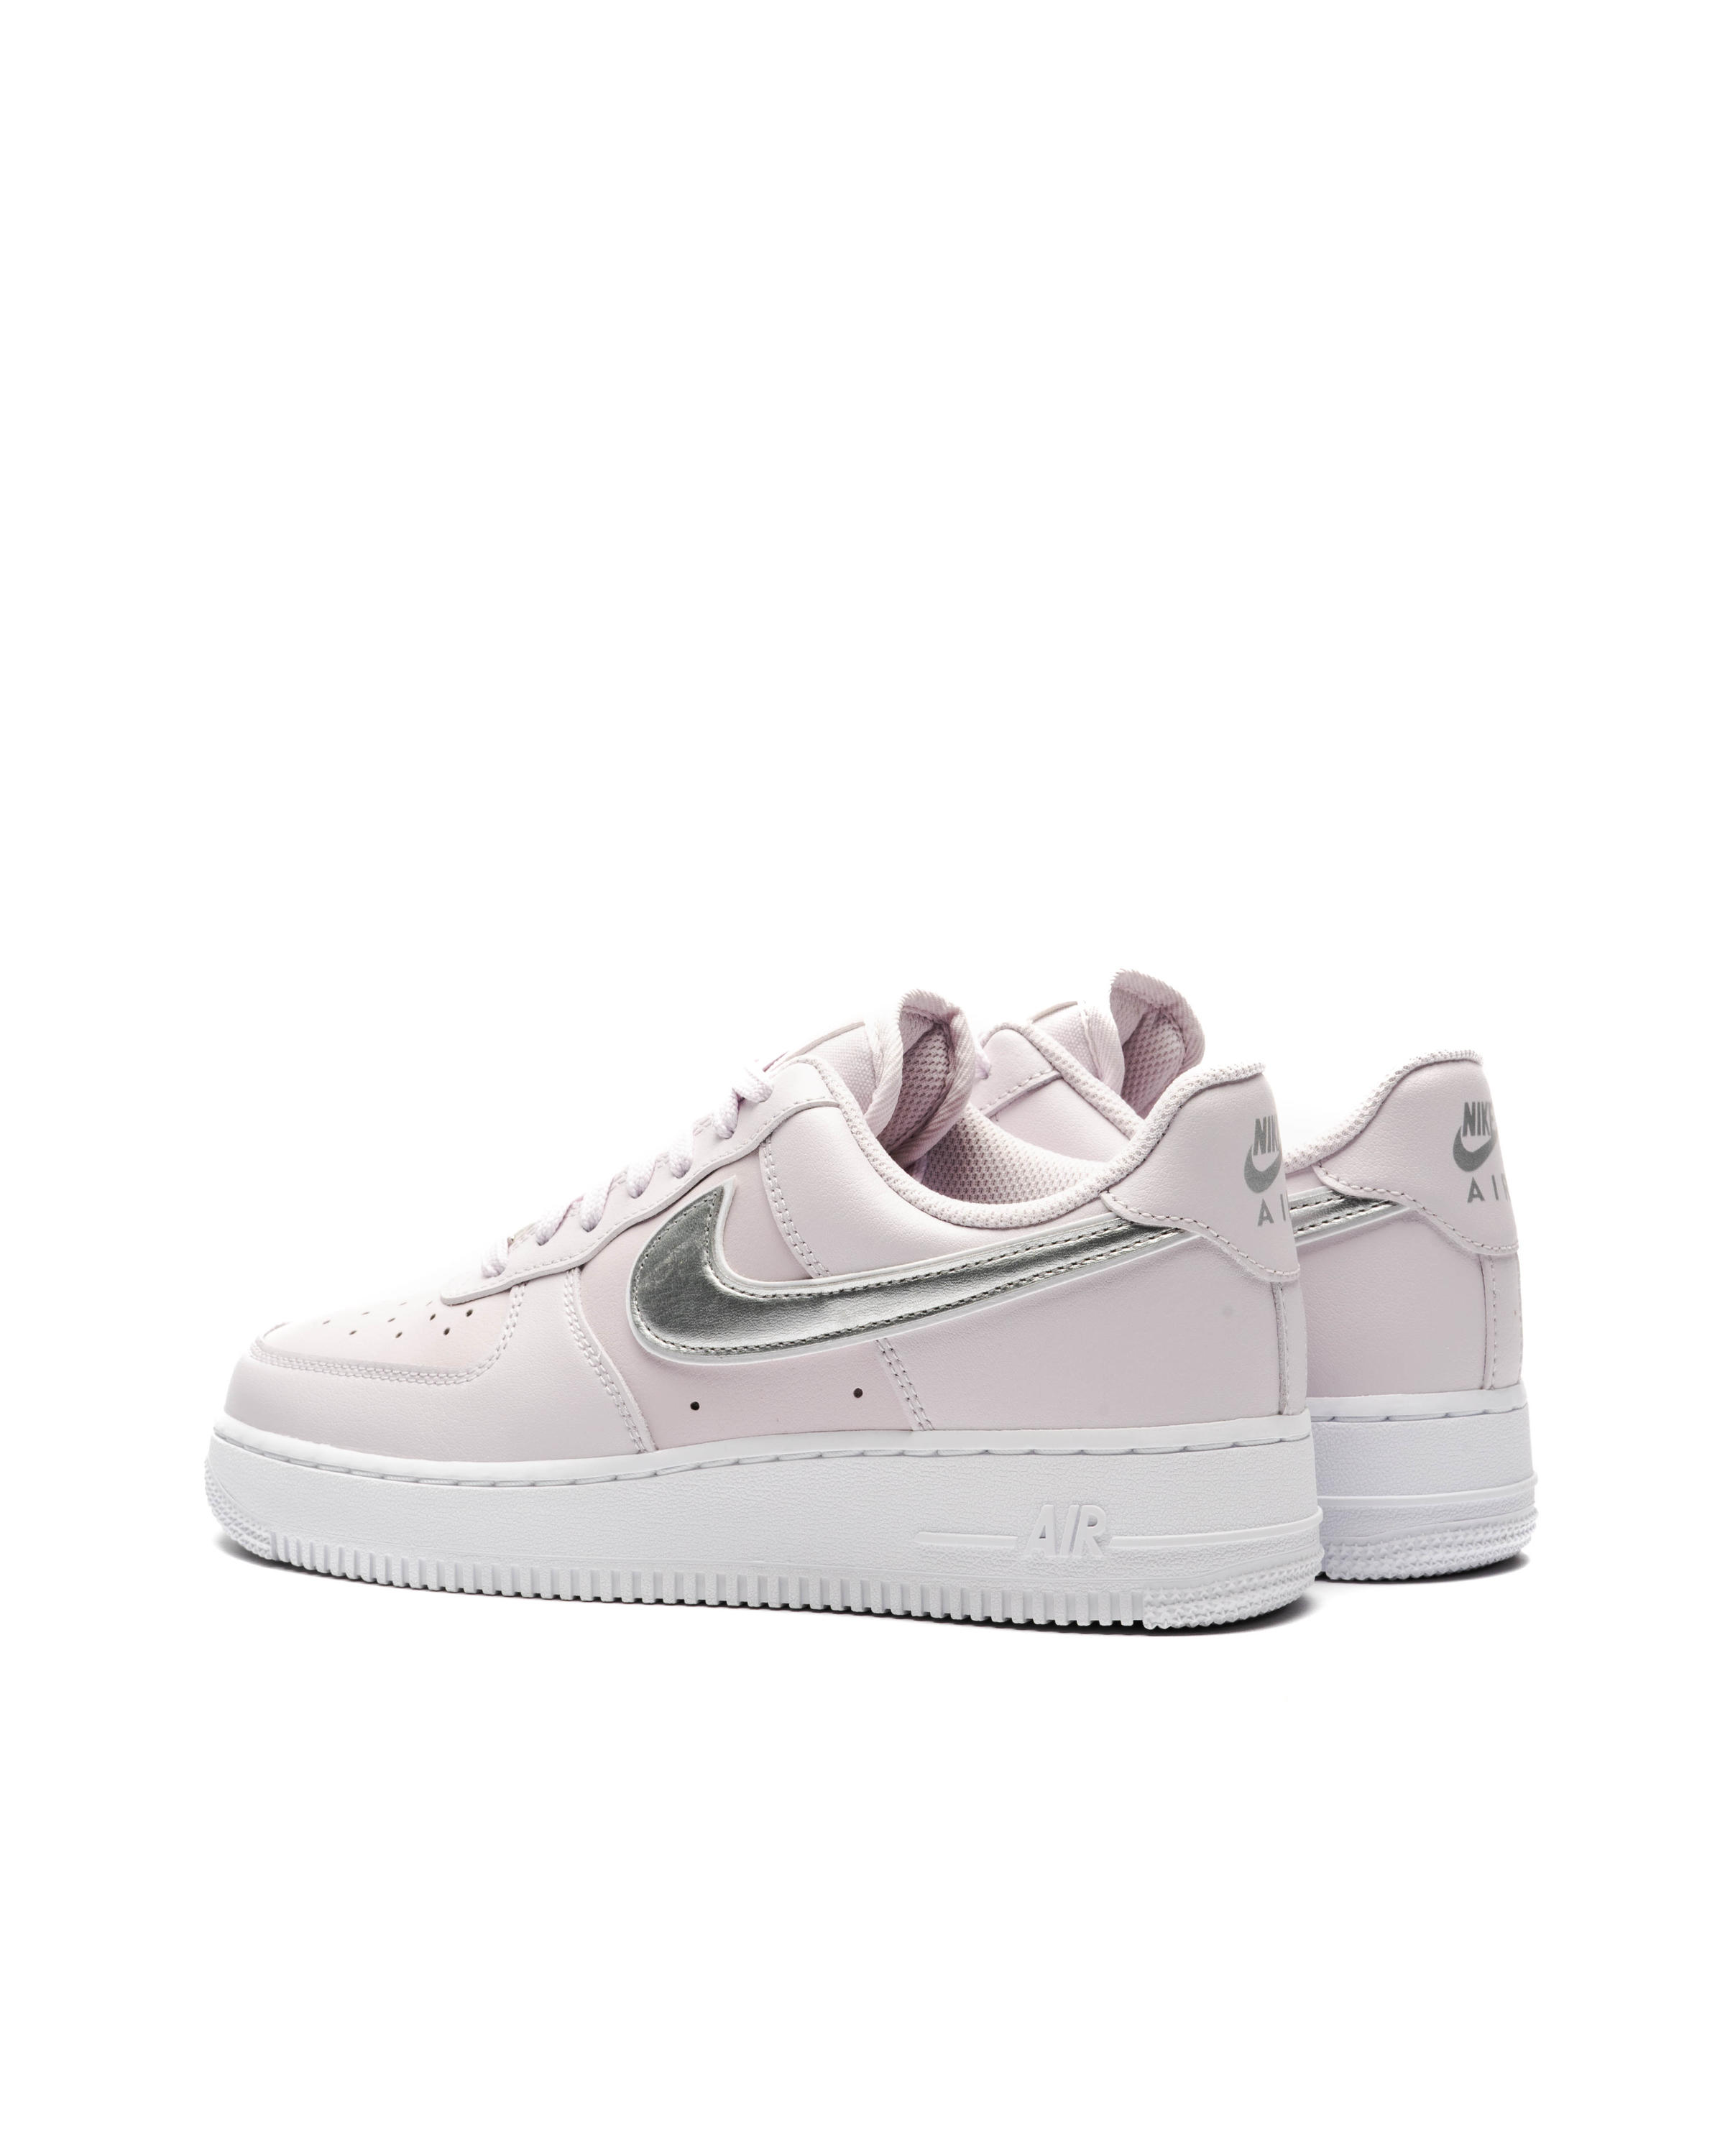 Nike WMNS AIR FORCE 1 '07 ESSENTIAL